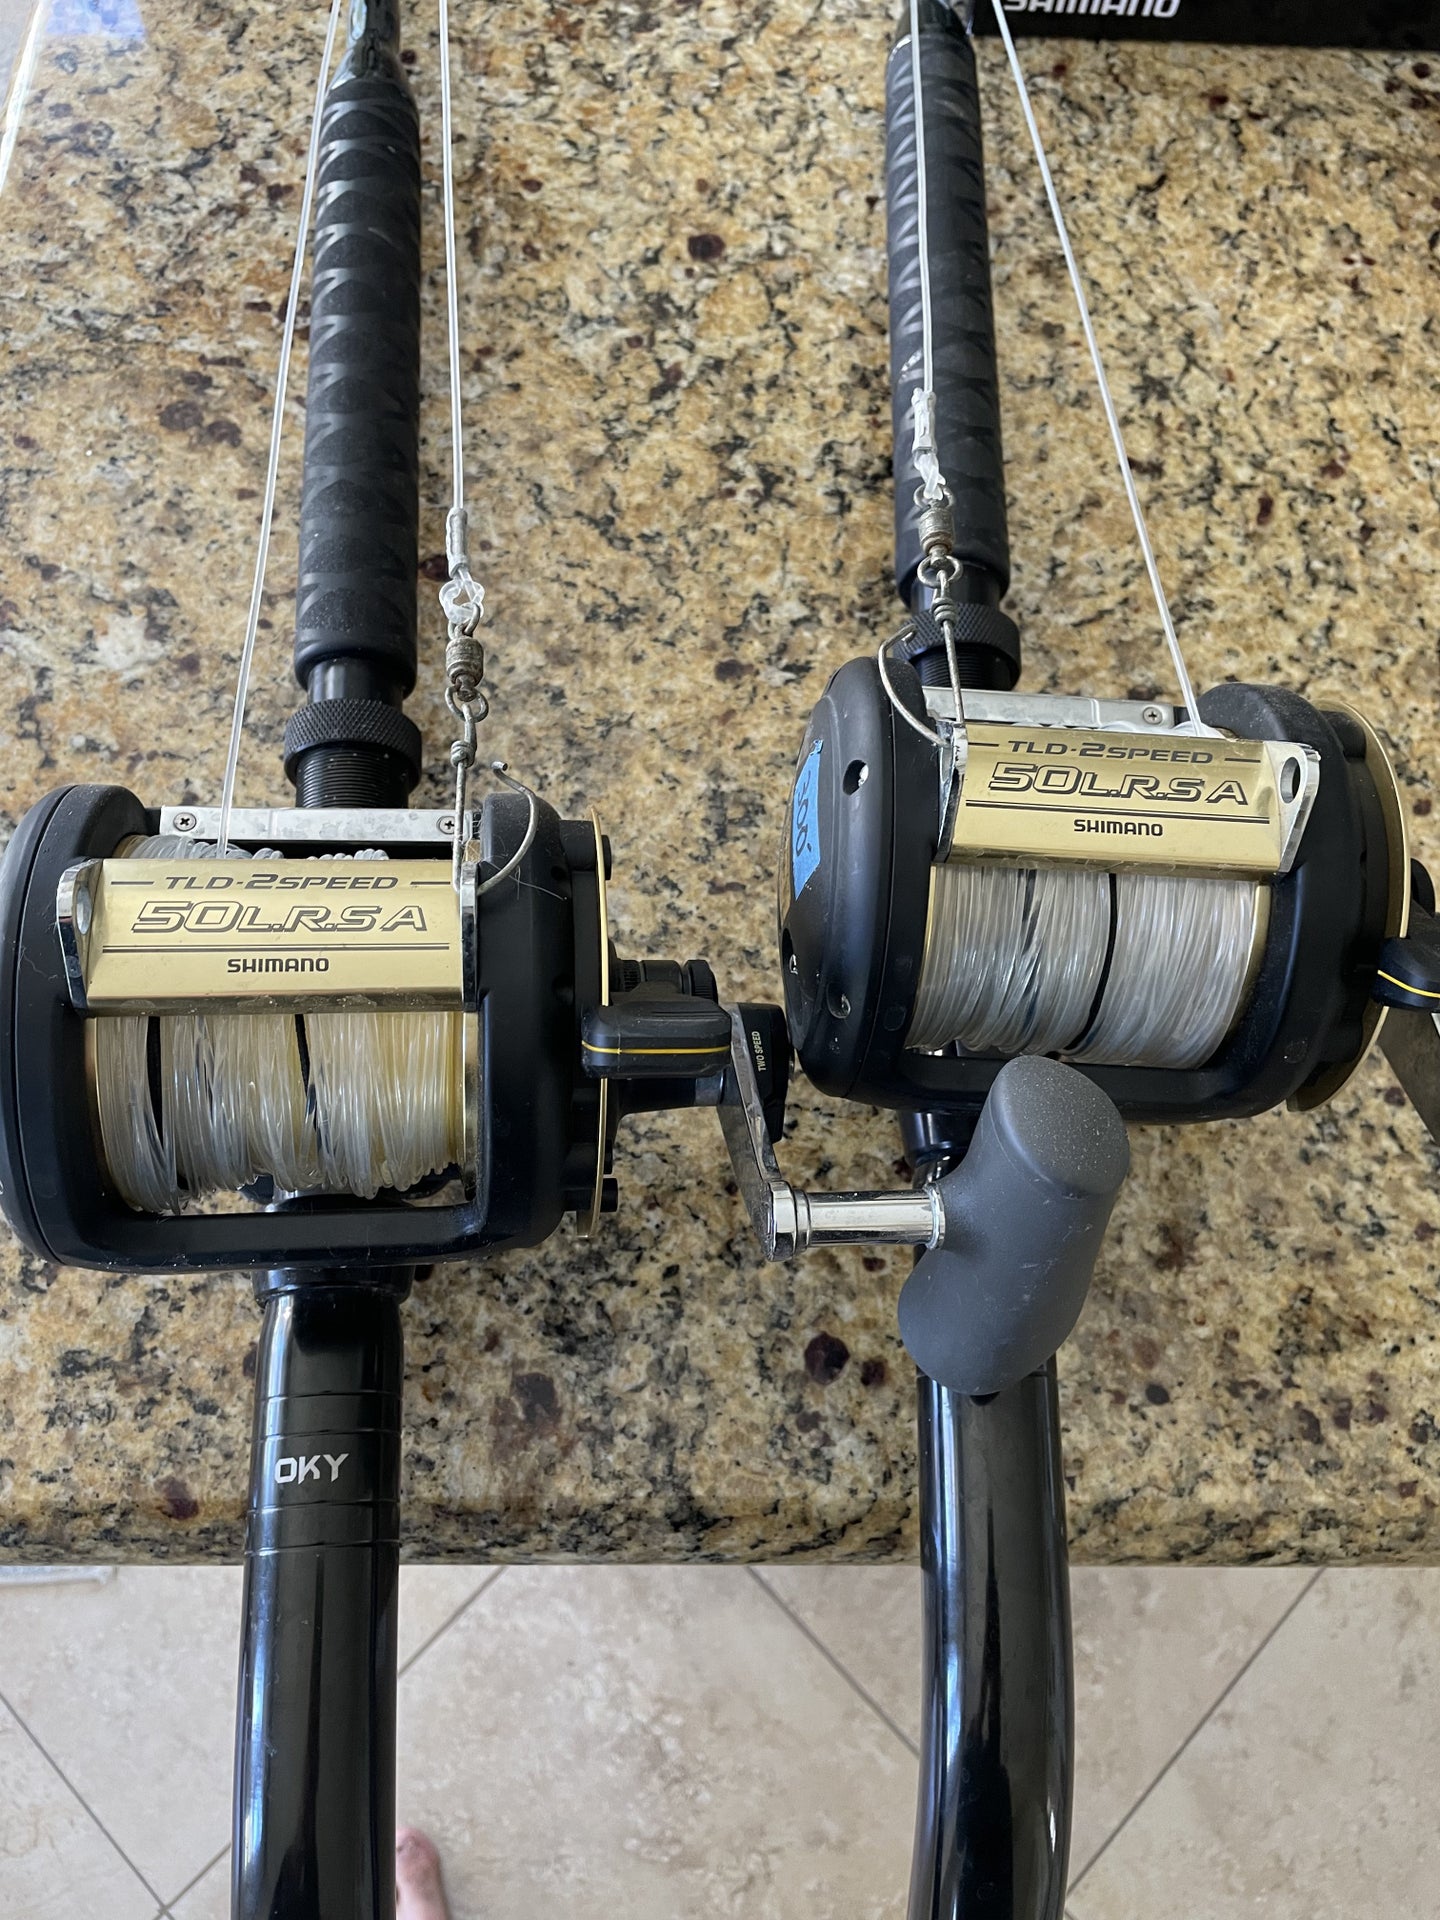 Two Shimano TLD 50LRSA 2speed reels matched w/ Okyaia bent but rods.